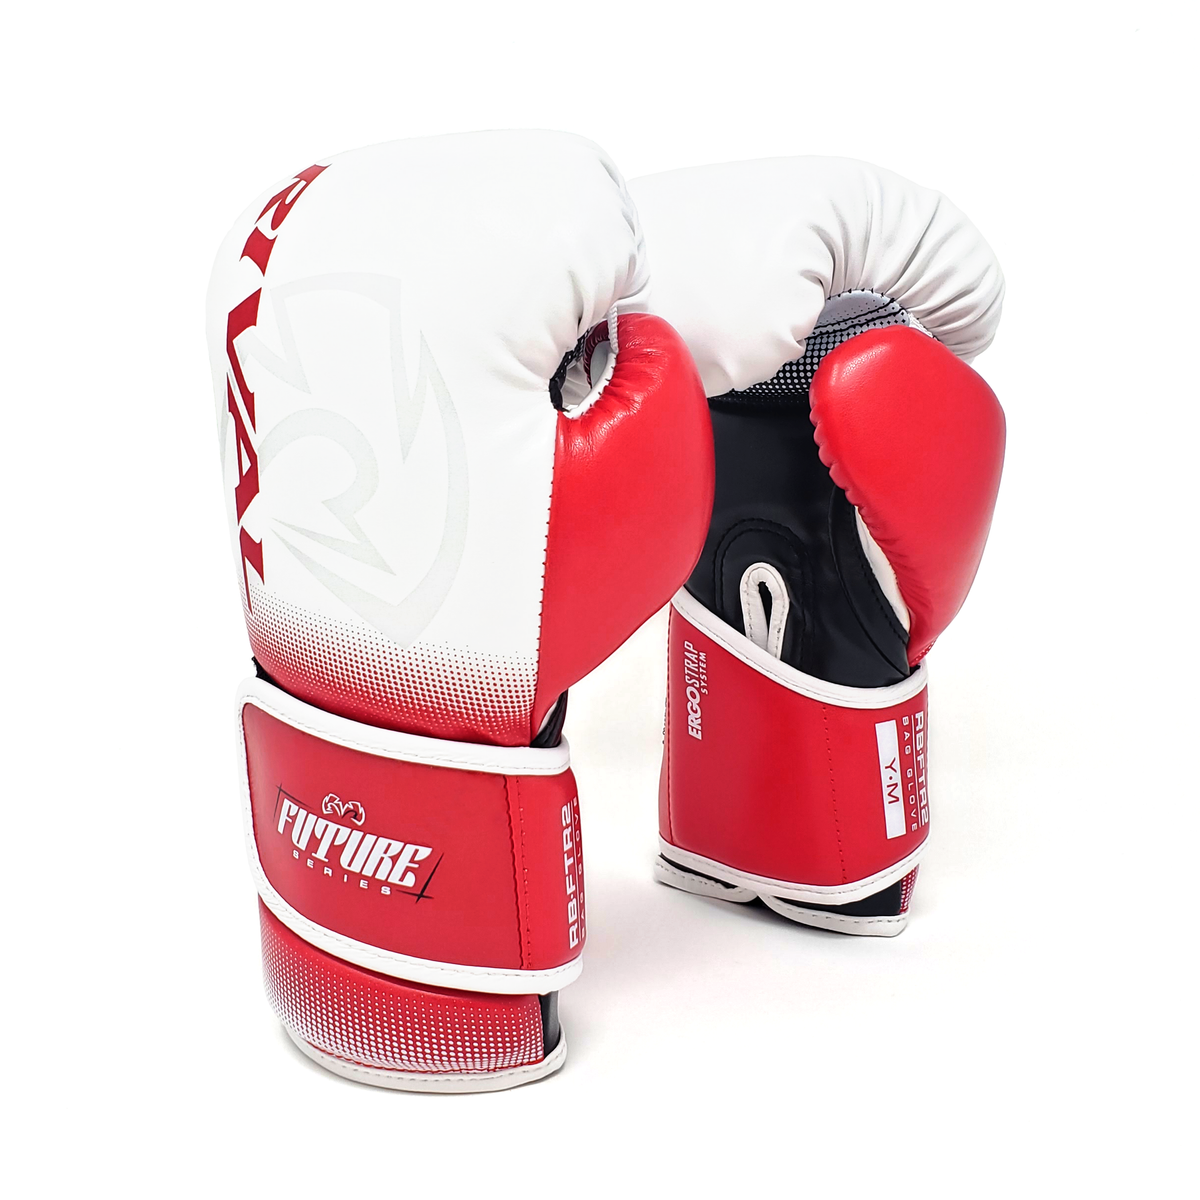 shopee boxing gloves